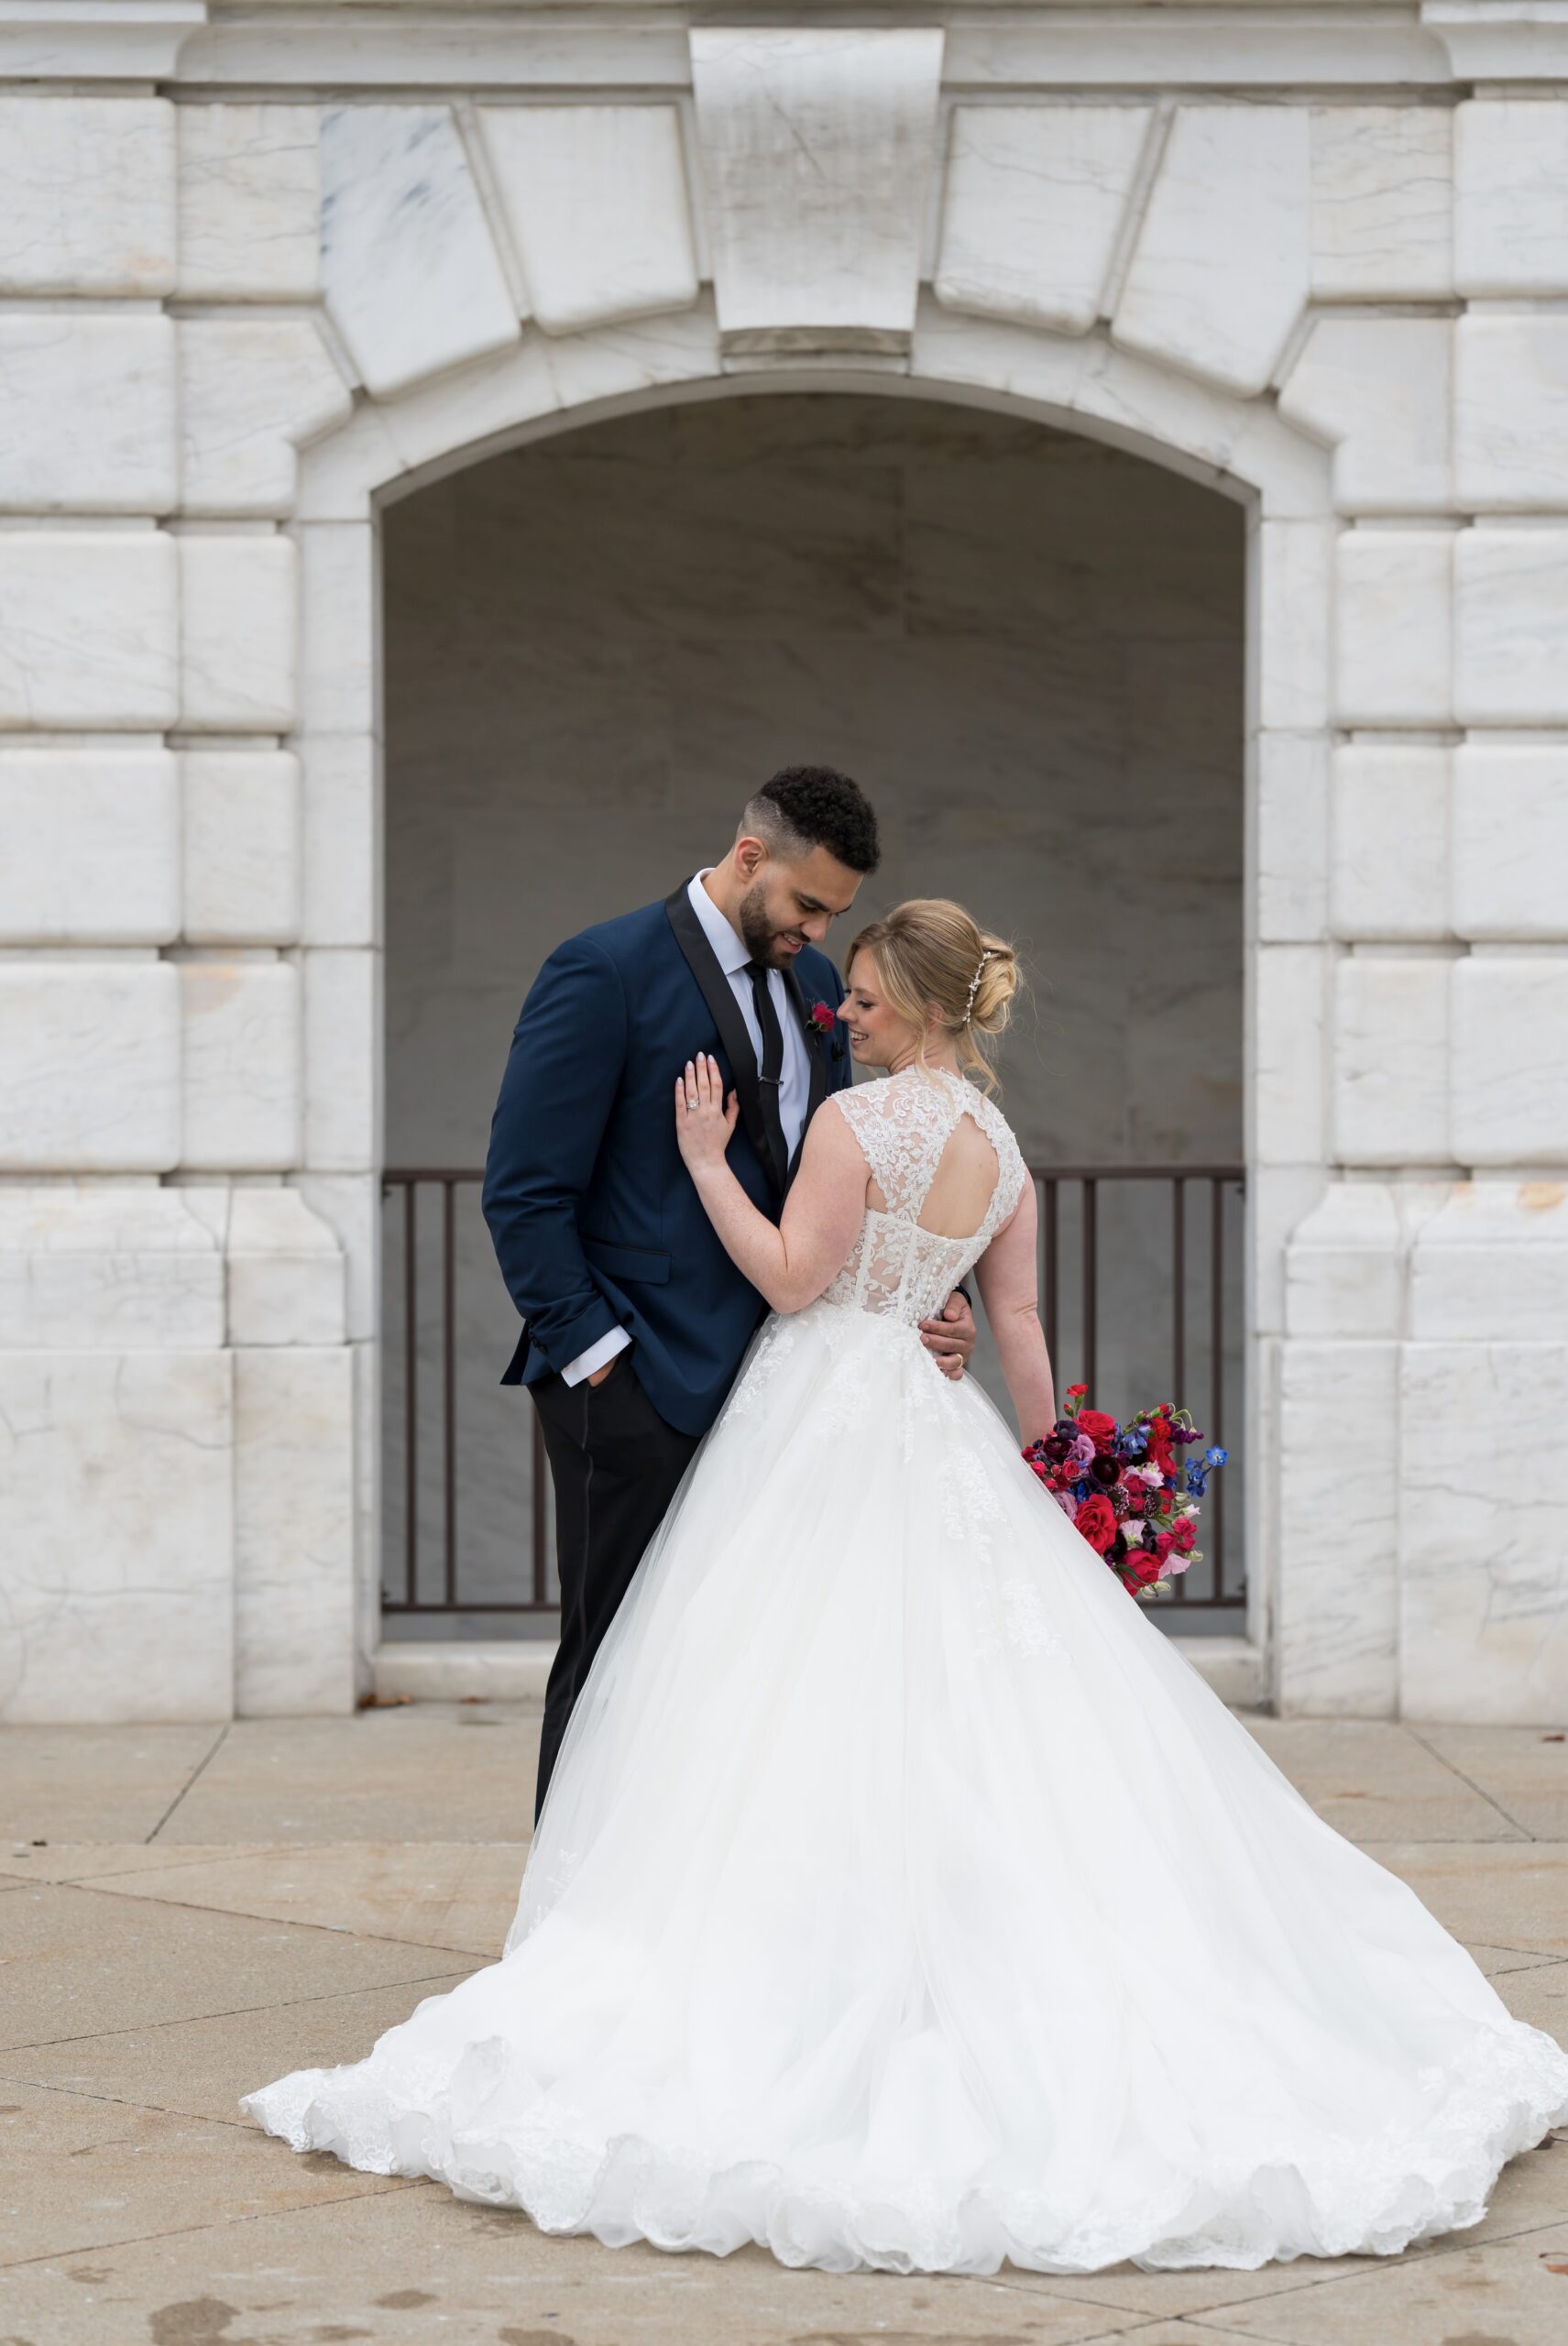 A couple, framed by a white marble arch behind them, touch foreheads on their wedding day.  